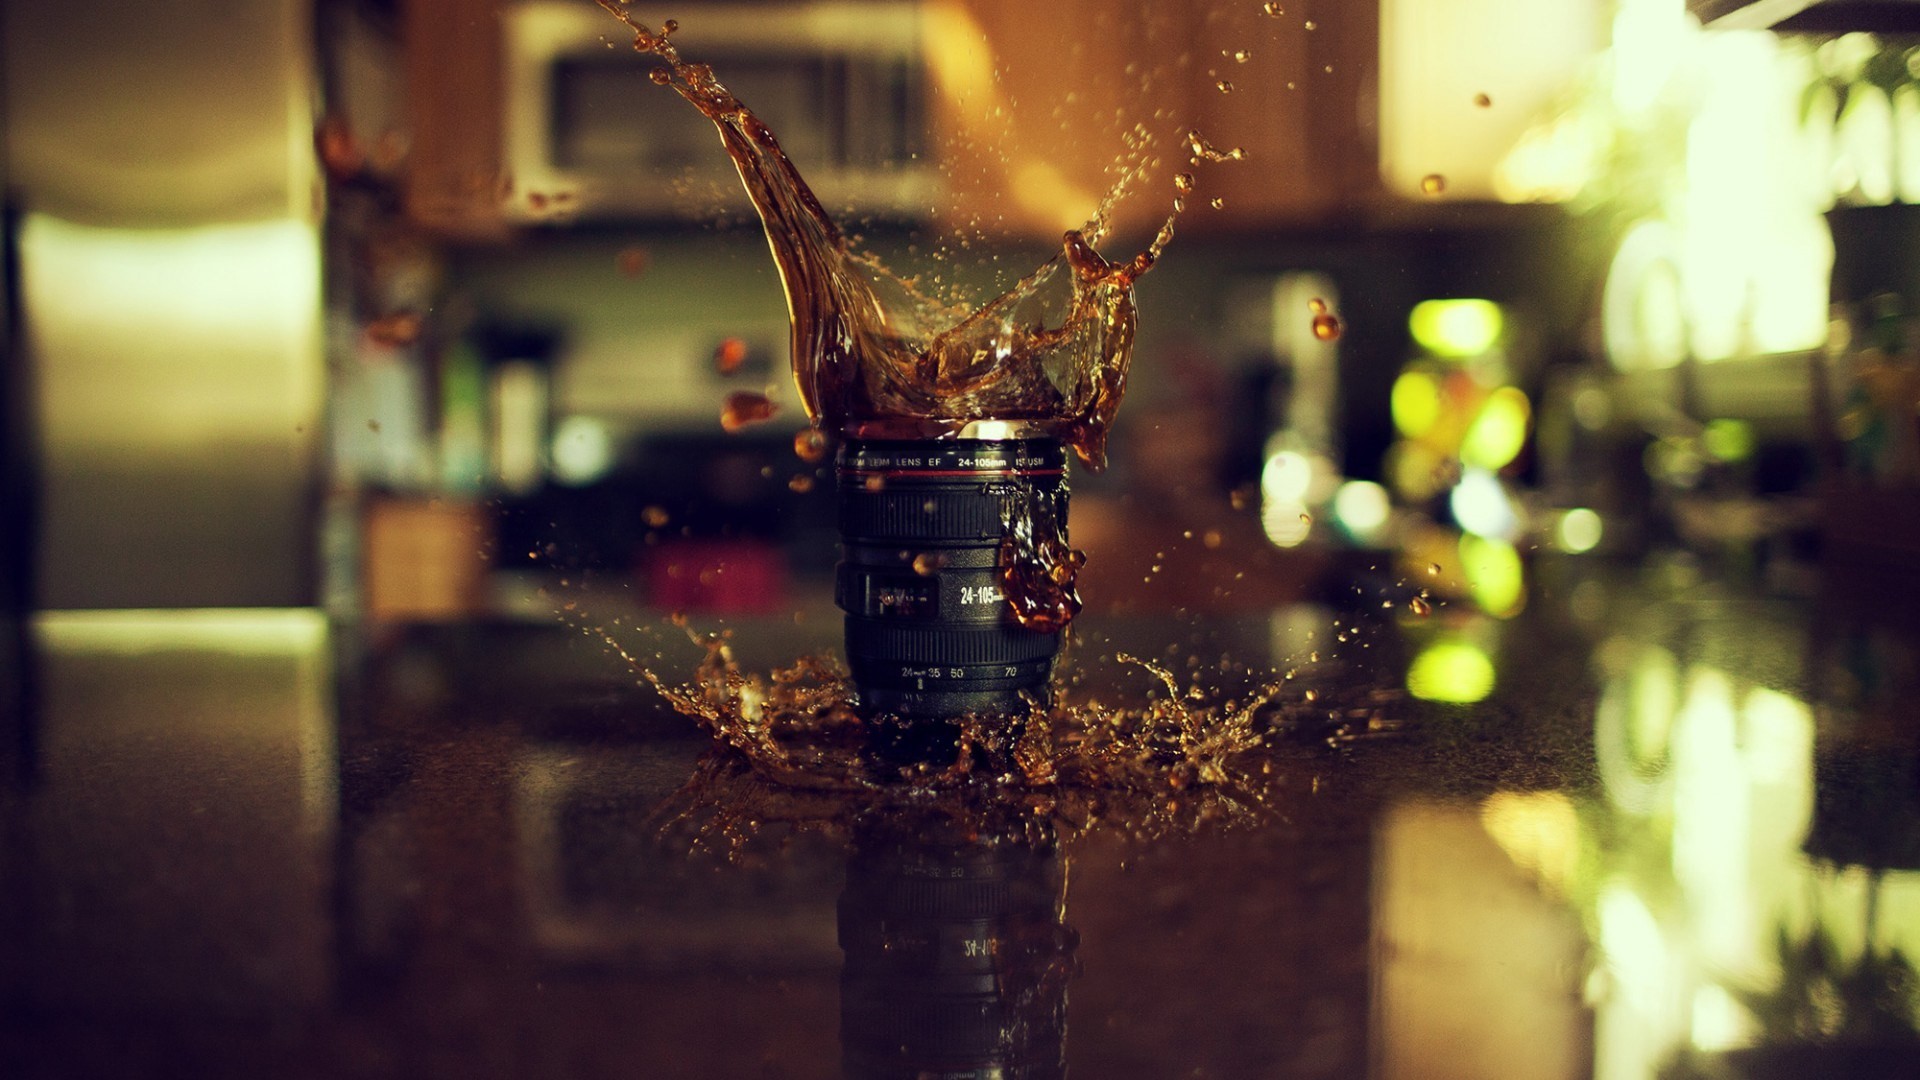 1920x1080 Find out: DSLR Lens Cup Coffee Splash wallpaper on http://hdpicorner.